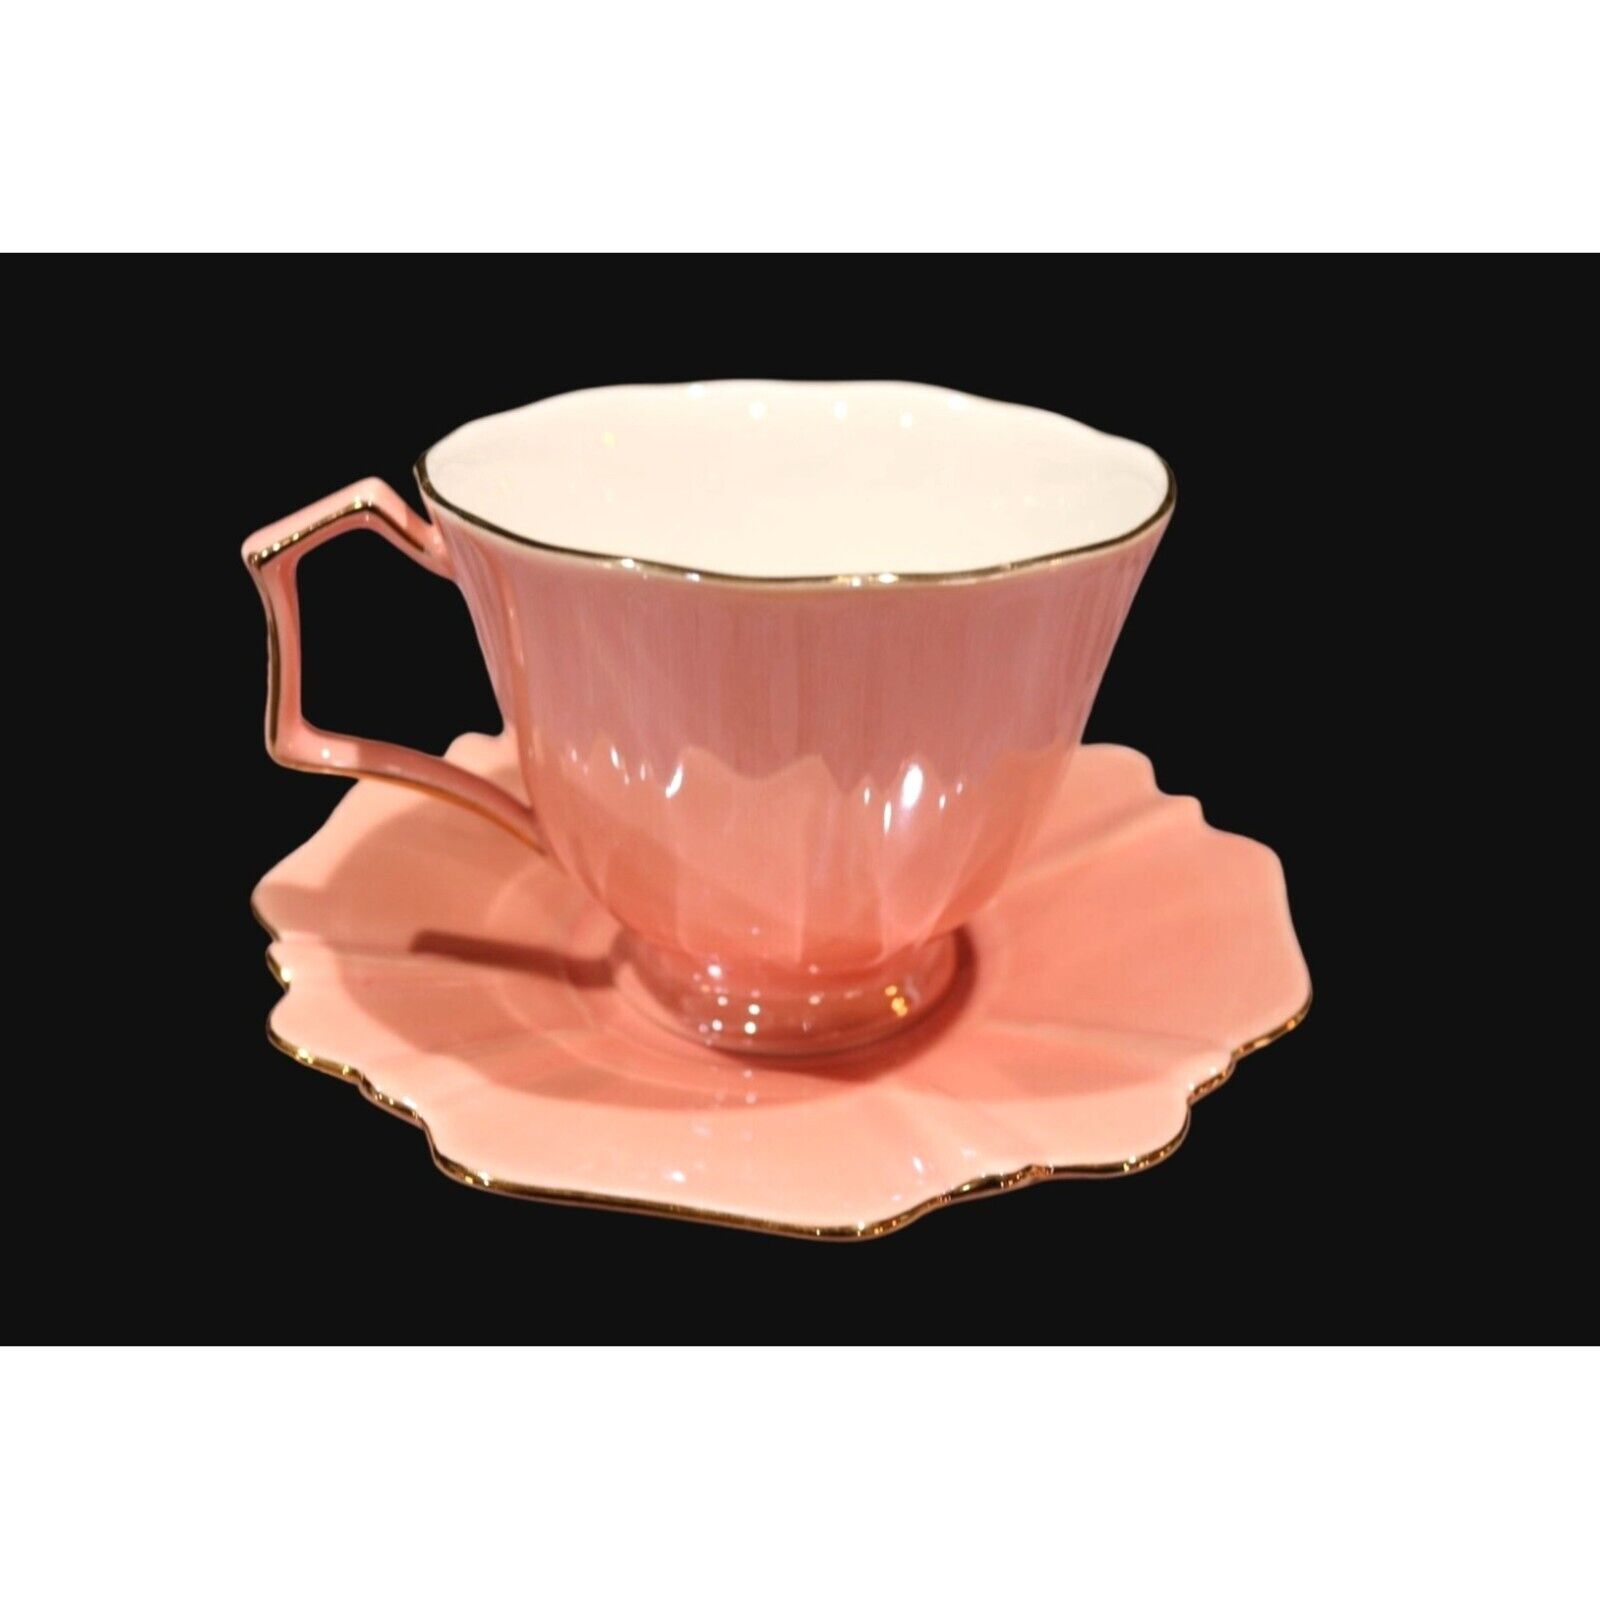 Vintage Meritage pink and gold with rose pattern teacup and saucer